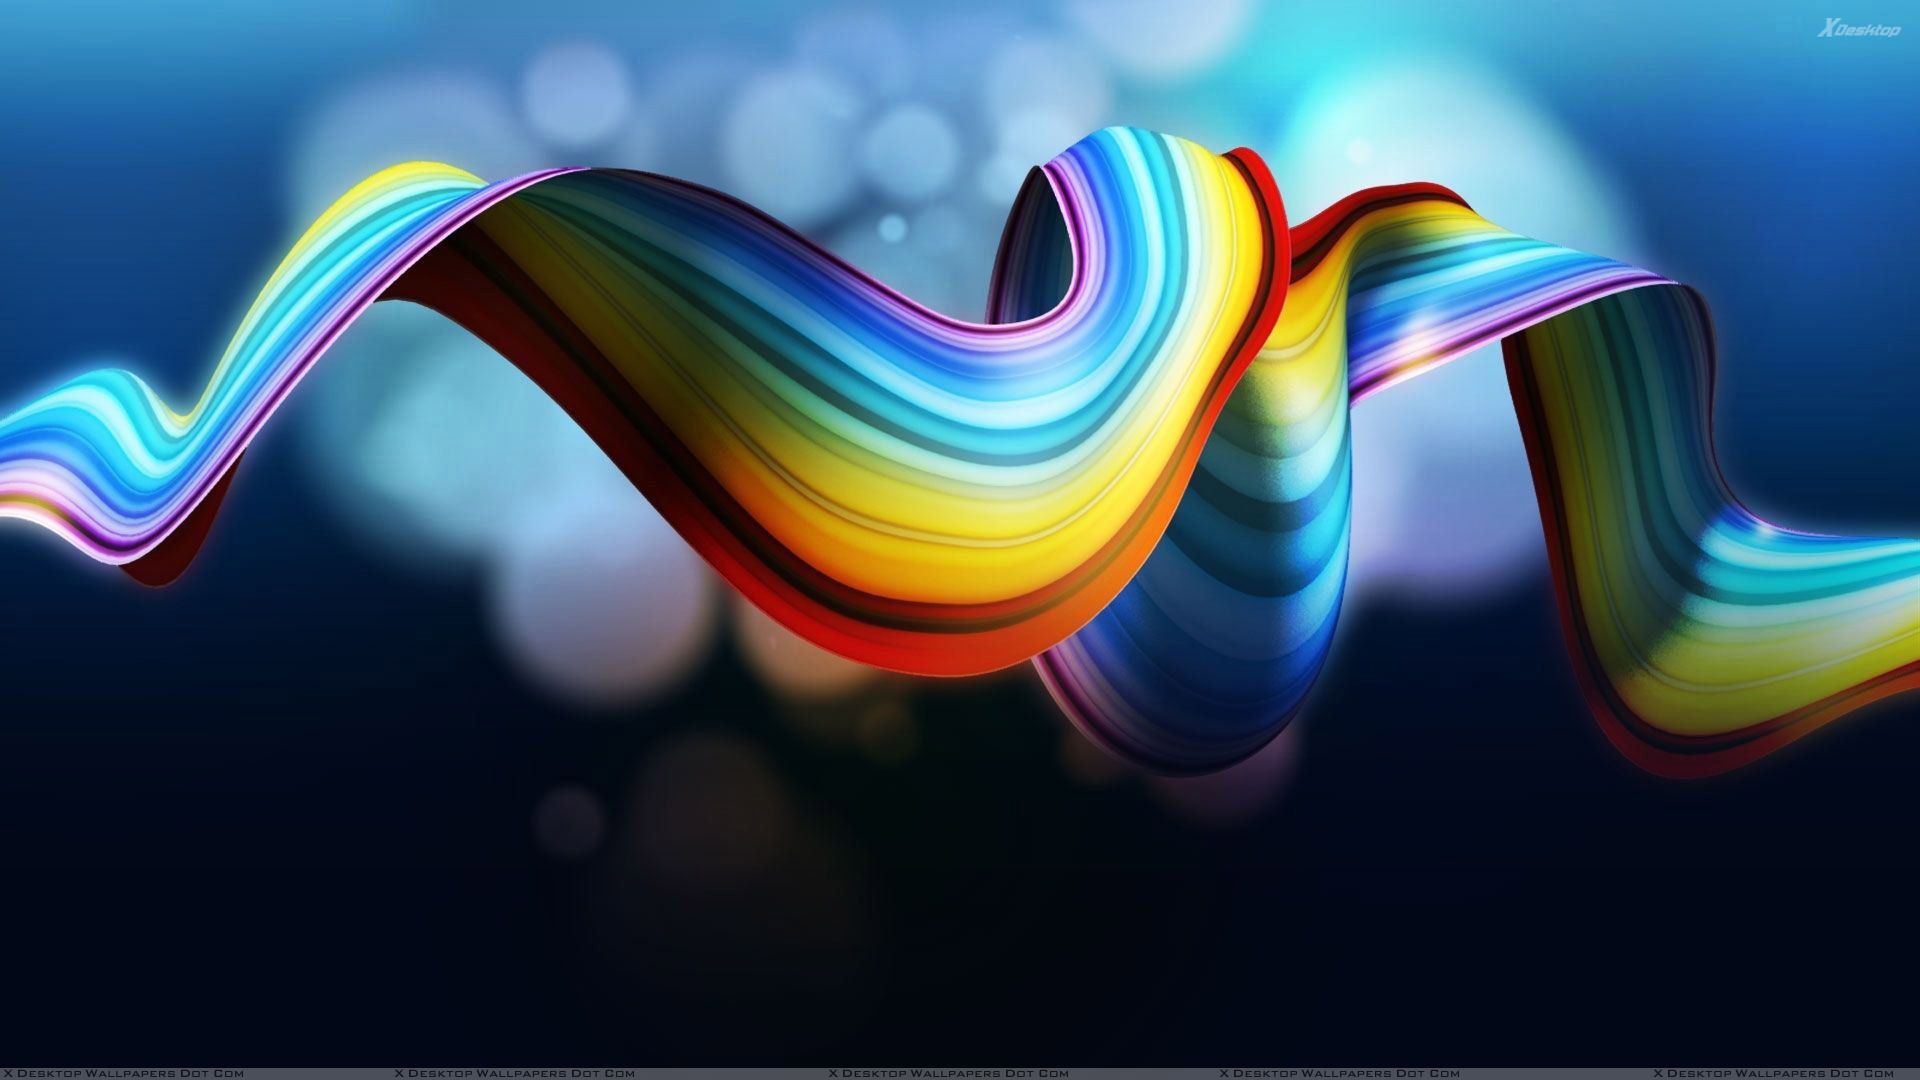 Hd wallpaper rainbow abstract backgrounds wallpapers55.com